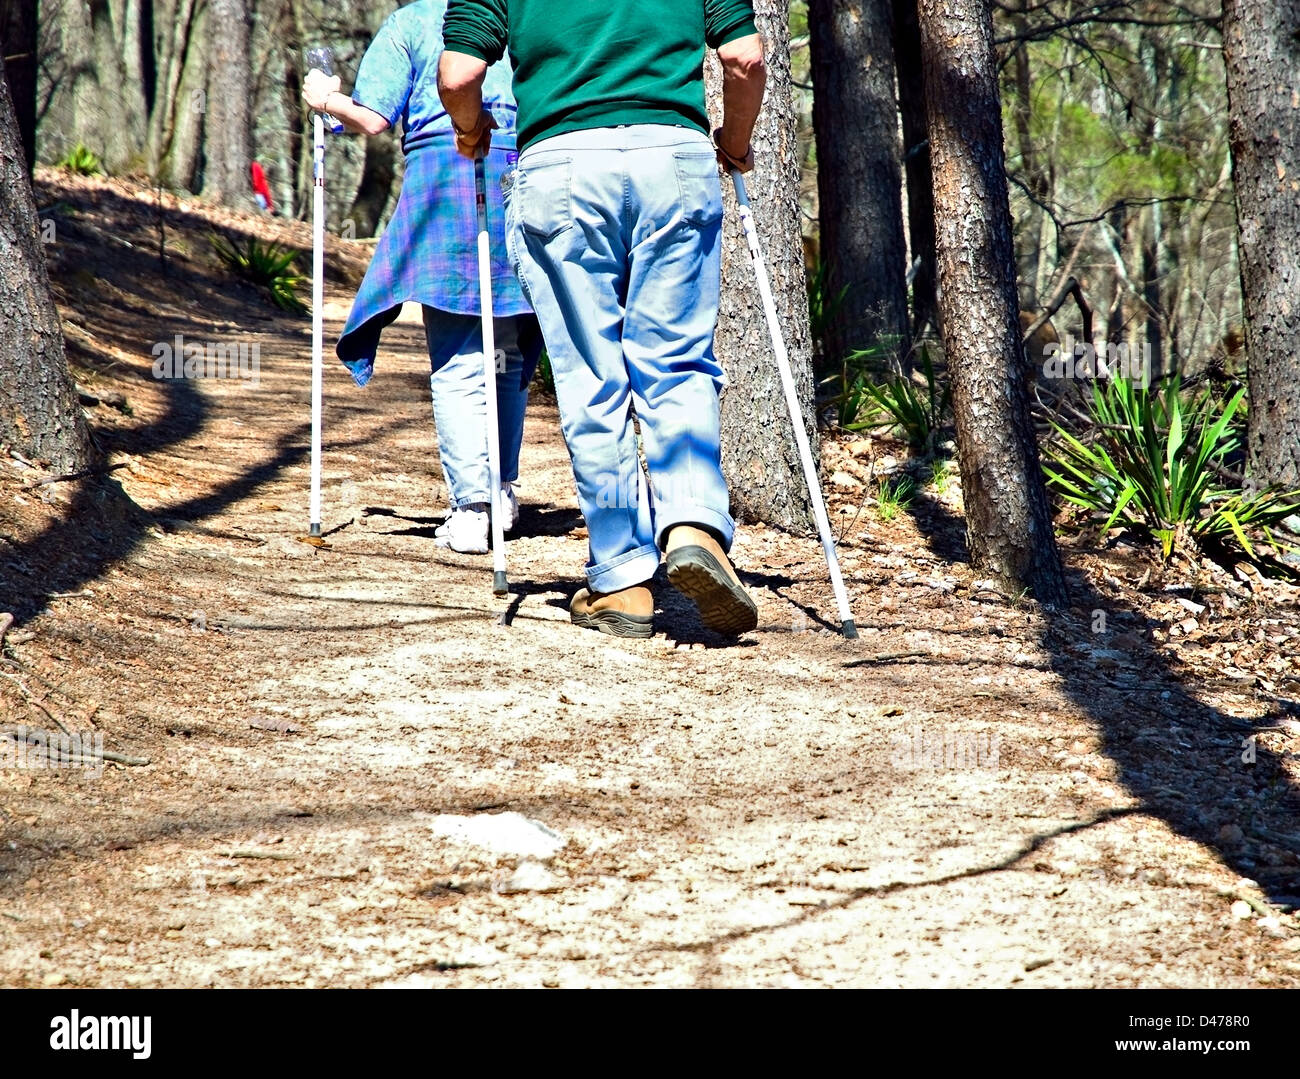 A man and woman walking with poles on a trail. Stock Photo